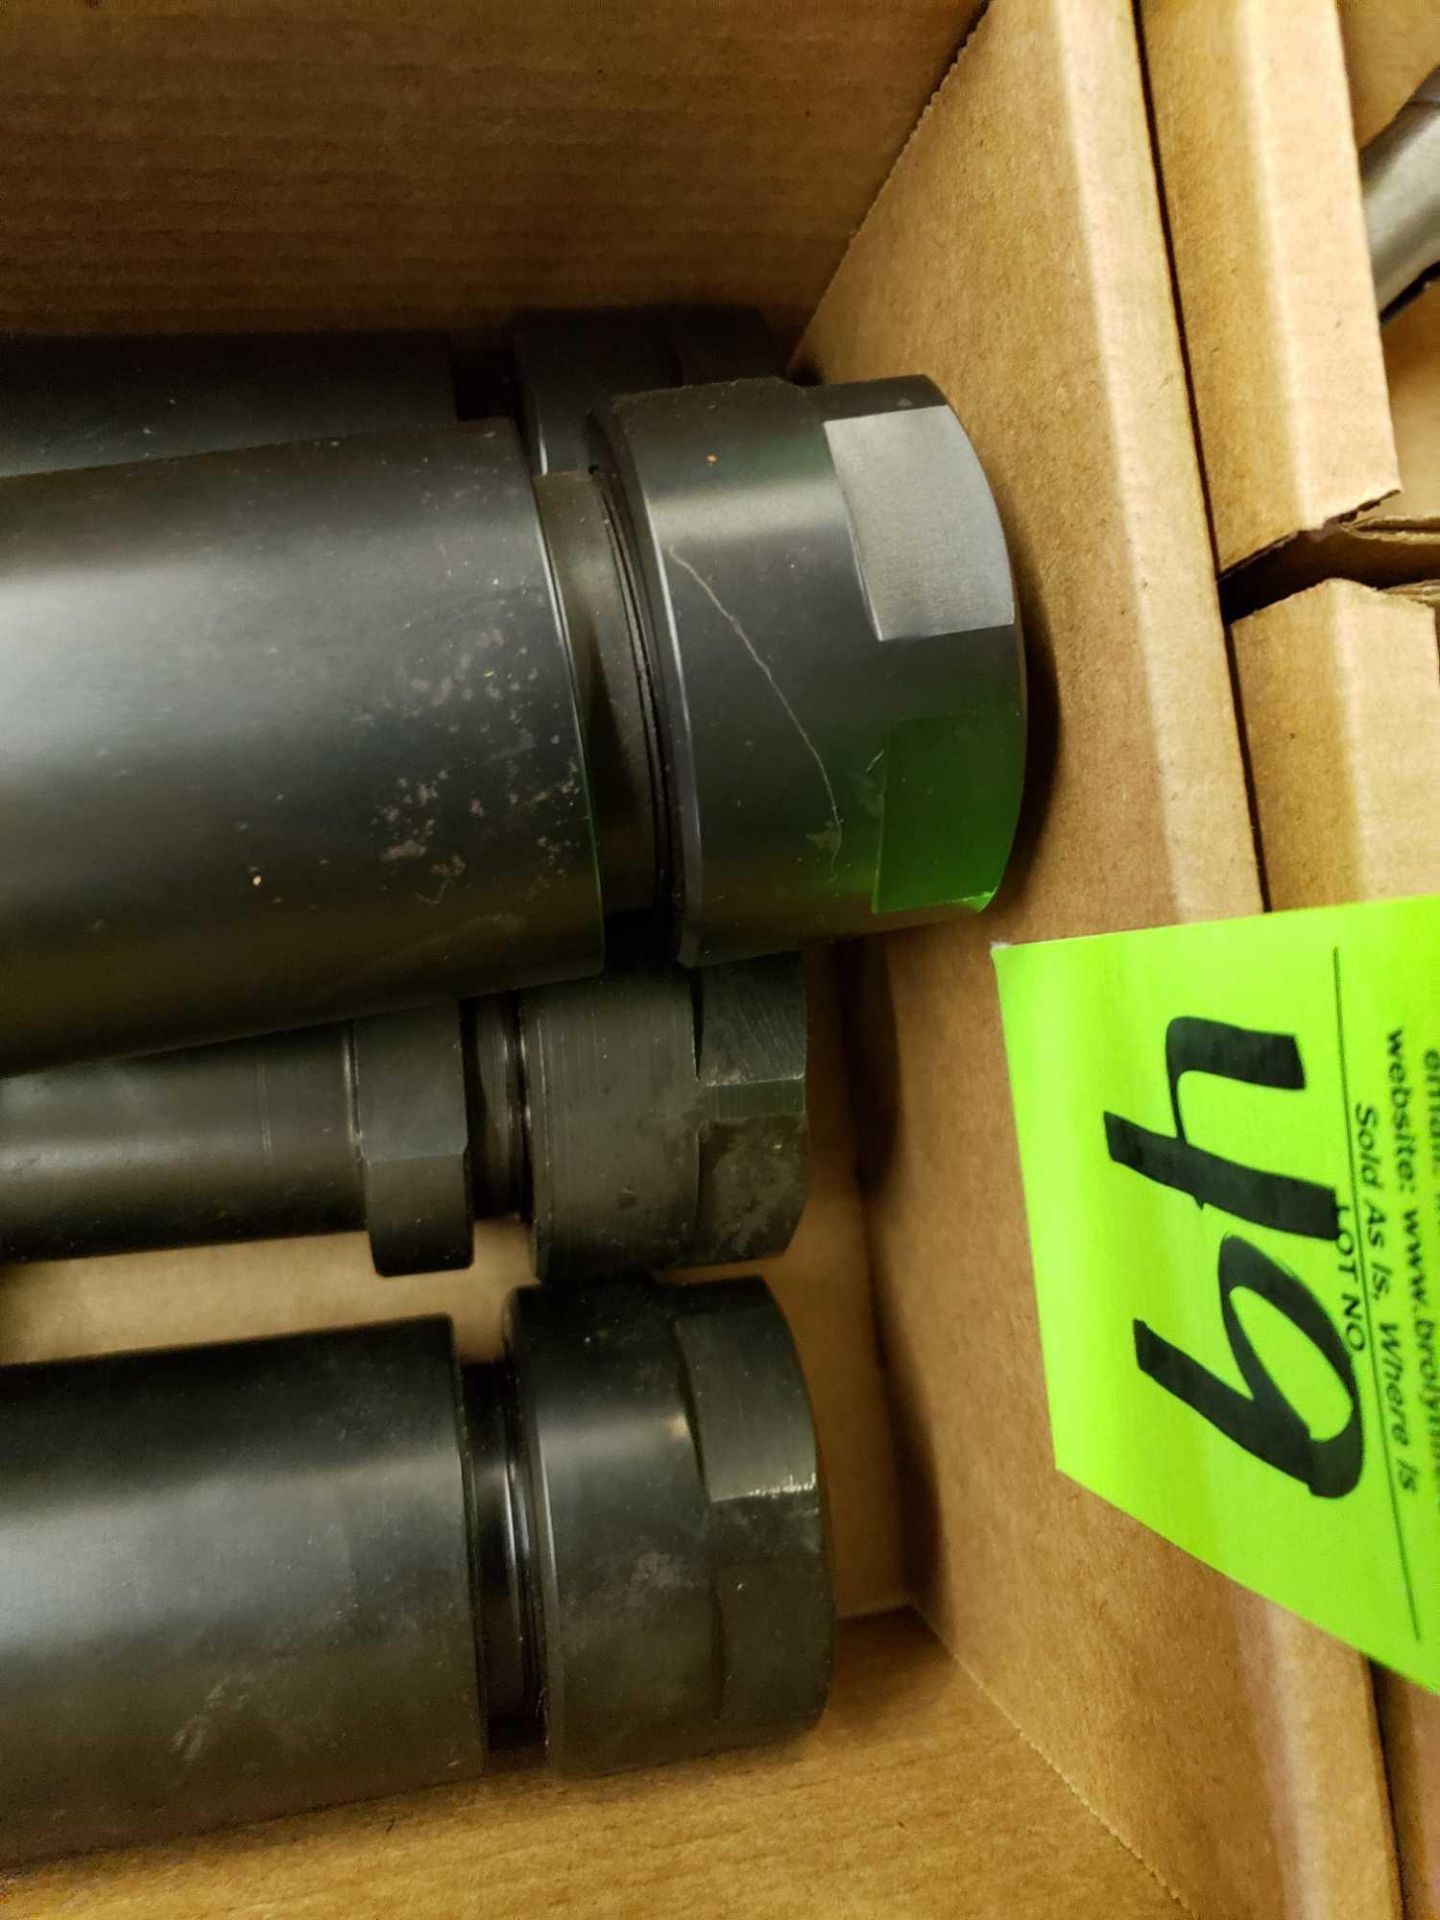 Qty 4 - Cat 40 tool holders. Most appear to be Kennametal. - Image 2 of 2